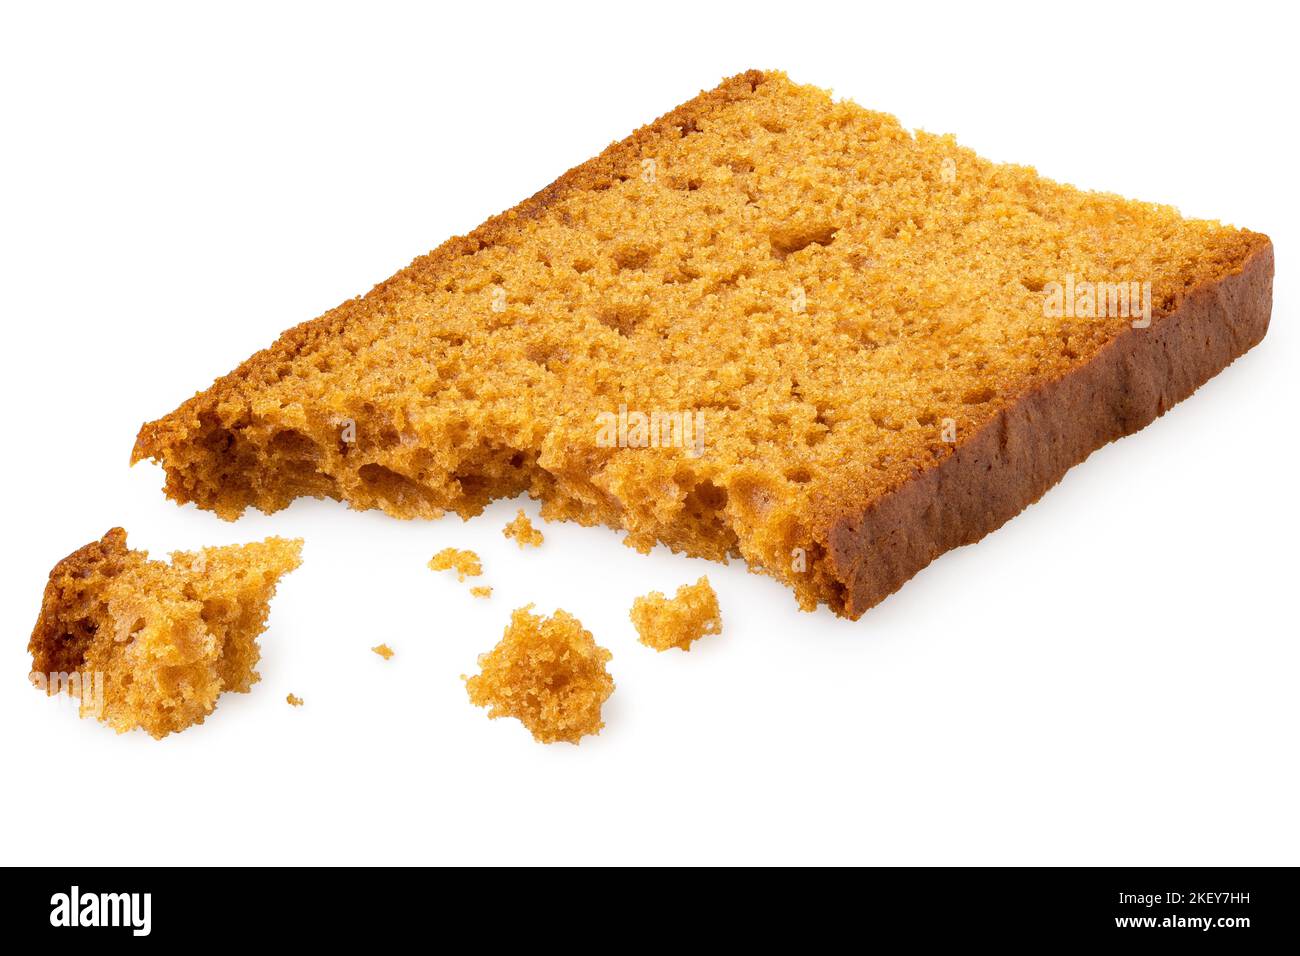 Partially eaten slice of spiced honey cake with crumbs isolated on white. Stock Photo